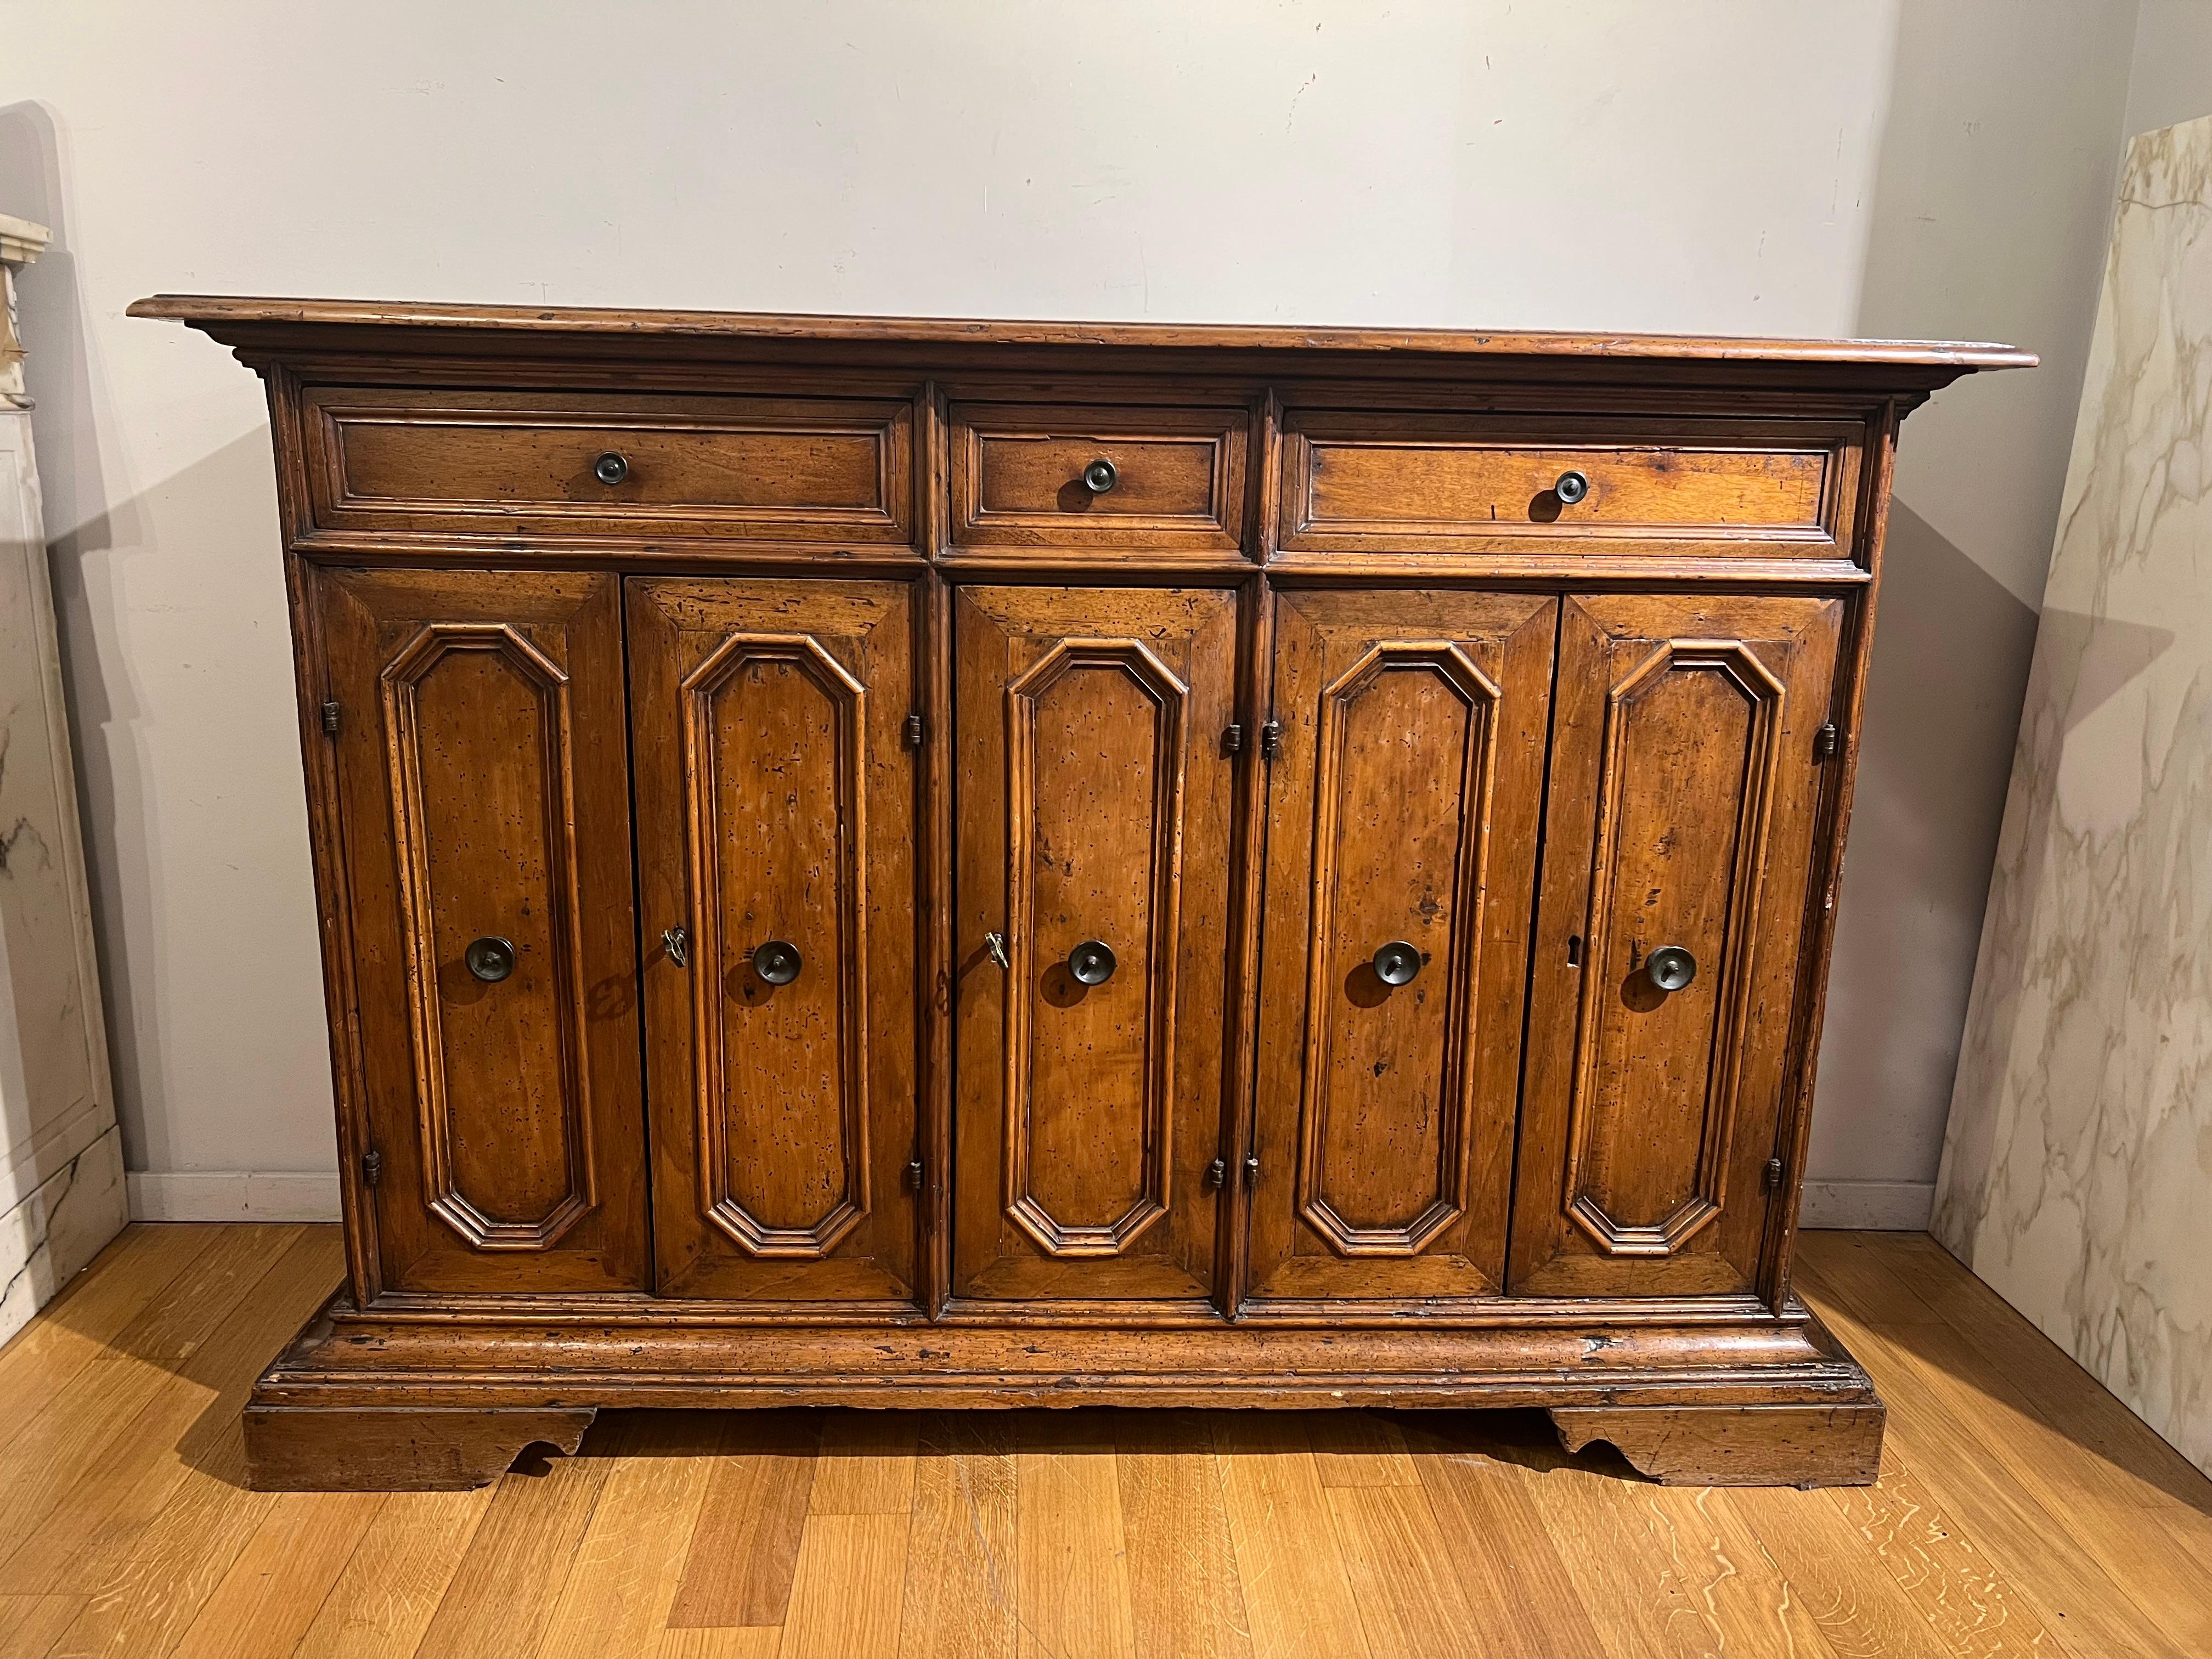 Beautiful sideboard made in solid walnut, not excessively deep with a bullnose edged top, three drawers and five doors. Turned bronze knobs, bracket feet.

Tuscan manufacture of the mid-seventeenth century.

MEASURES: cm 100x150x51.